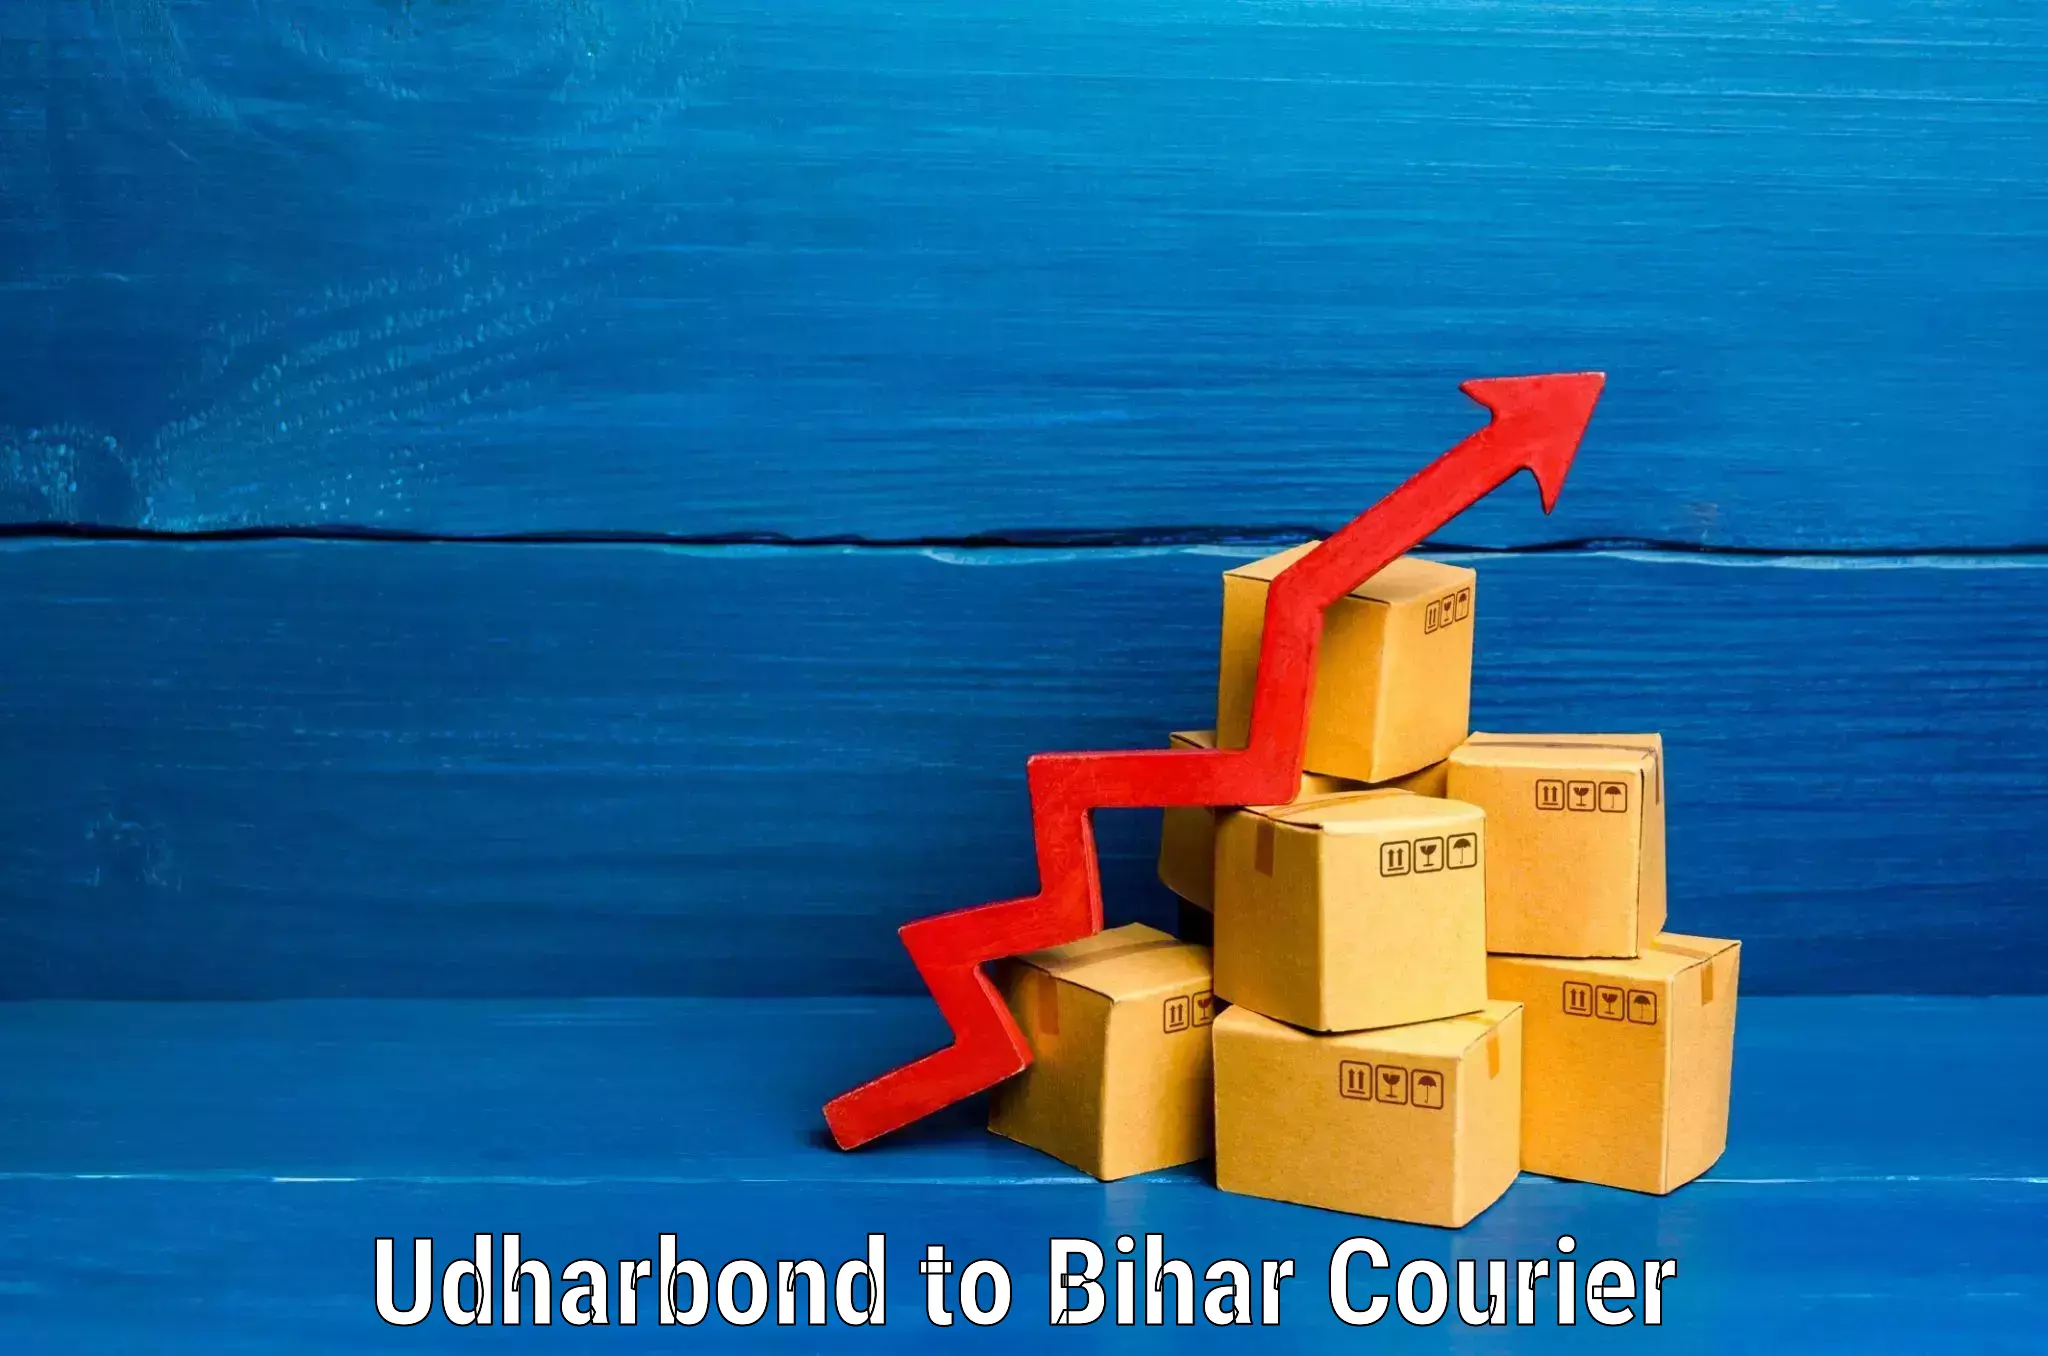 Luggage delivery system Udharbond to Darbhanga